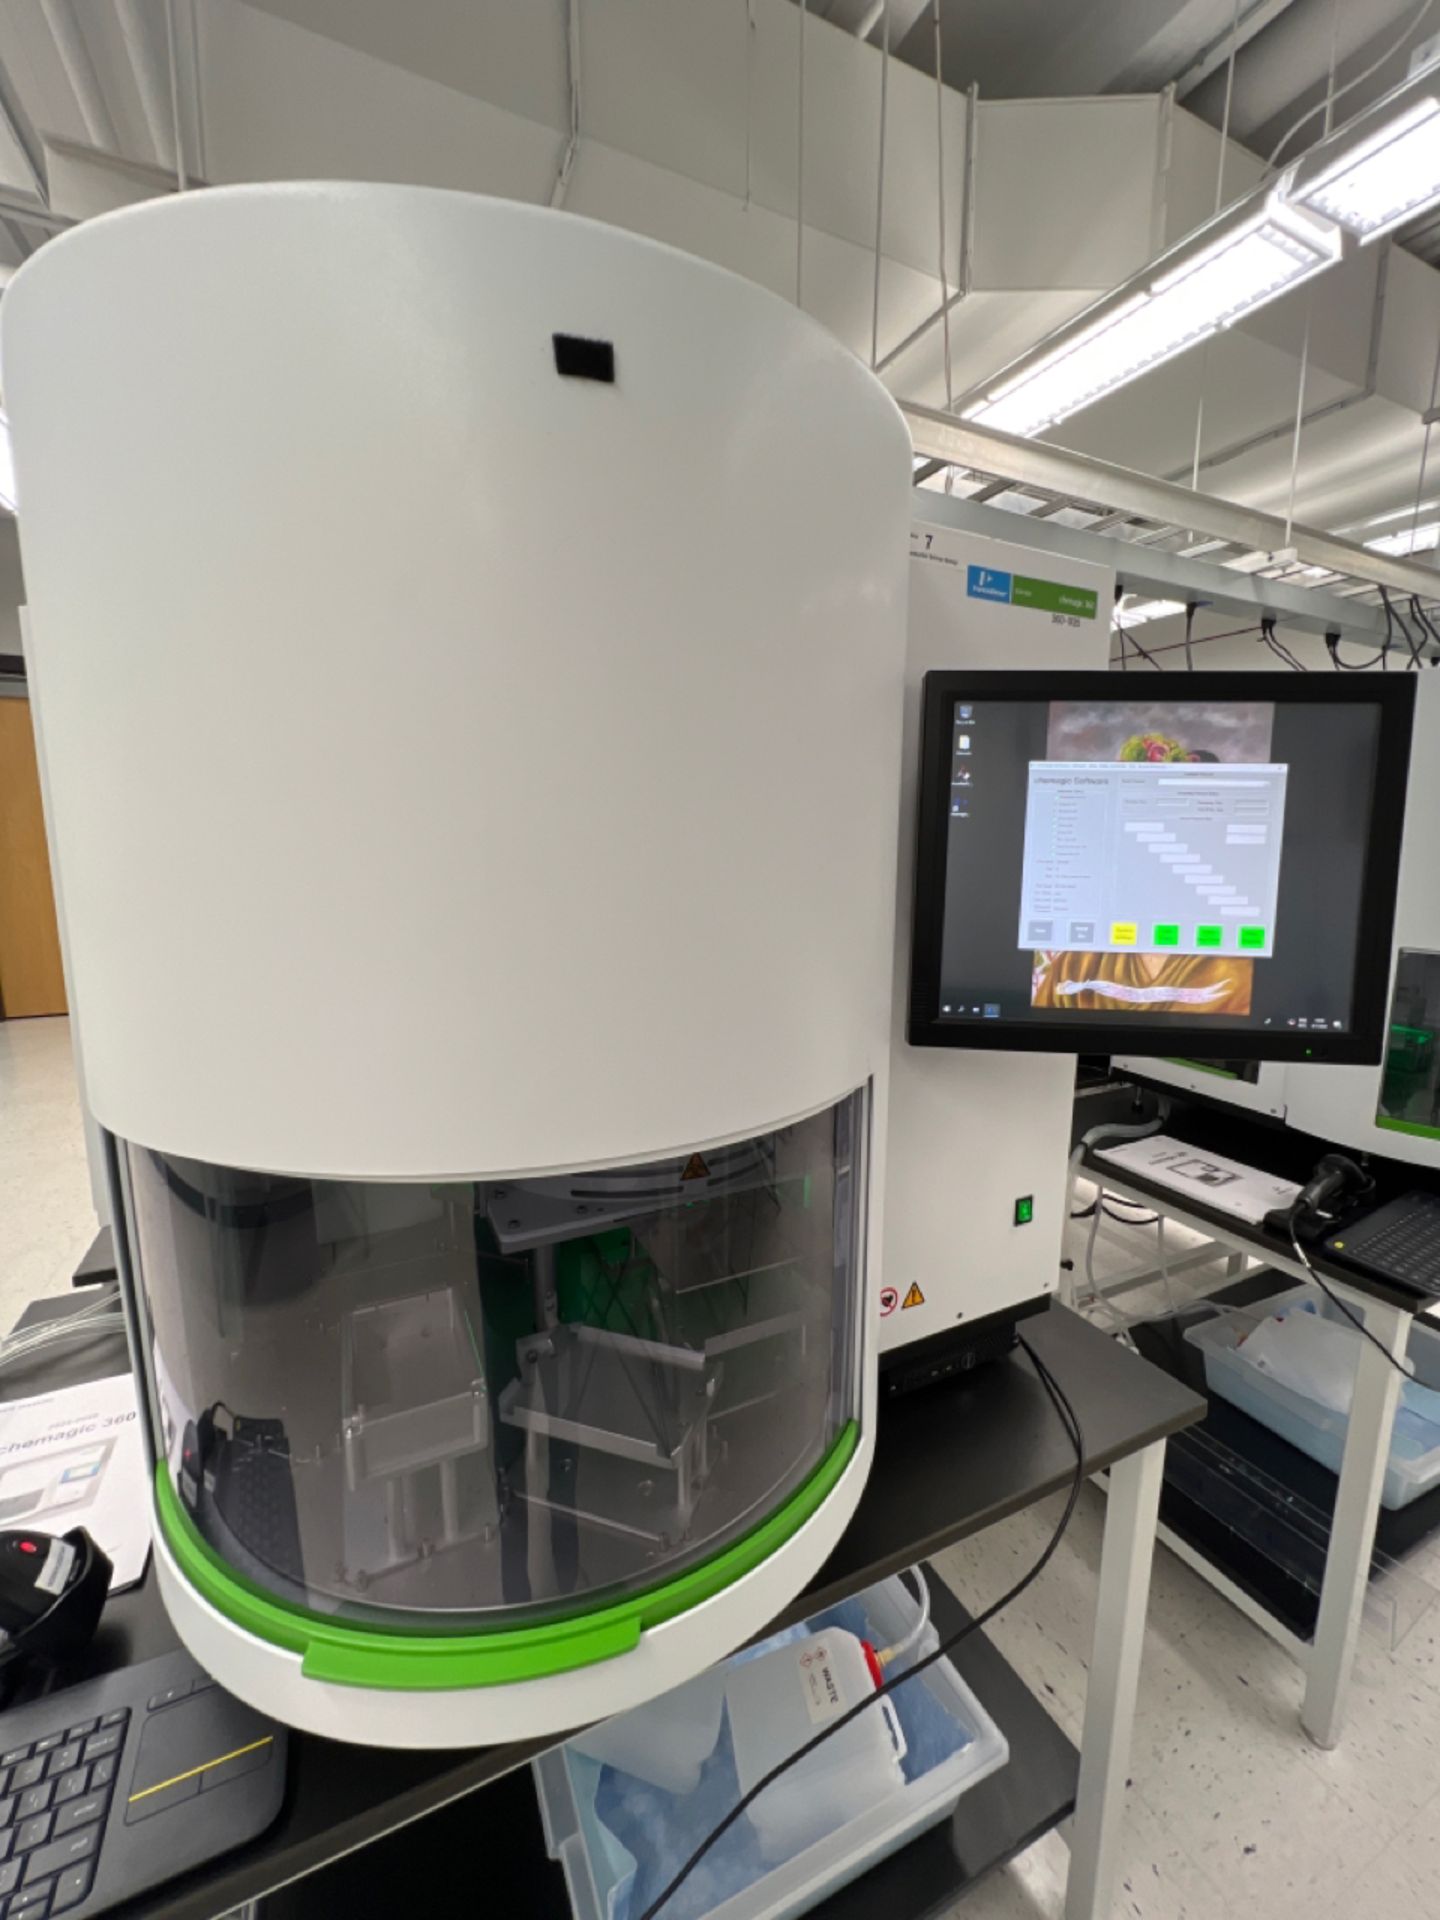 PERKINELMER CHEMAGIC 360 NUCLEIC ACID EXTRACTOR AUG-2020 SOFTWARE 6.3.0.3 2024-0020 20240935 TABLE - Image 4 of 18